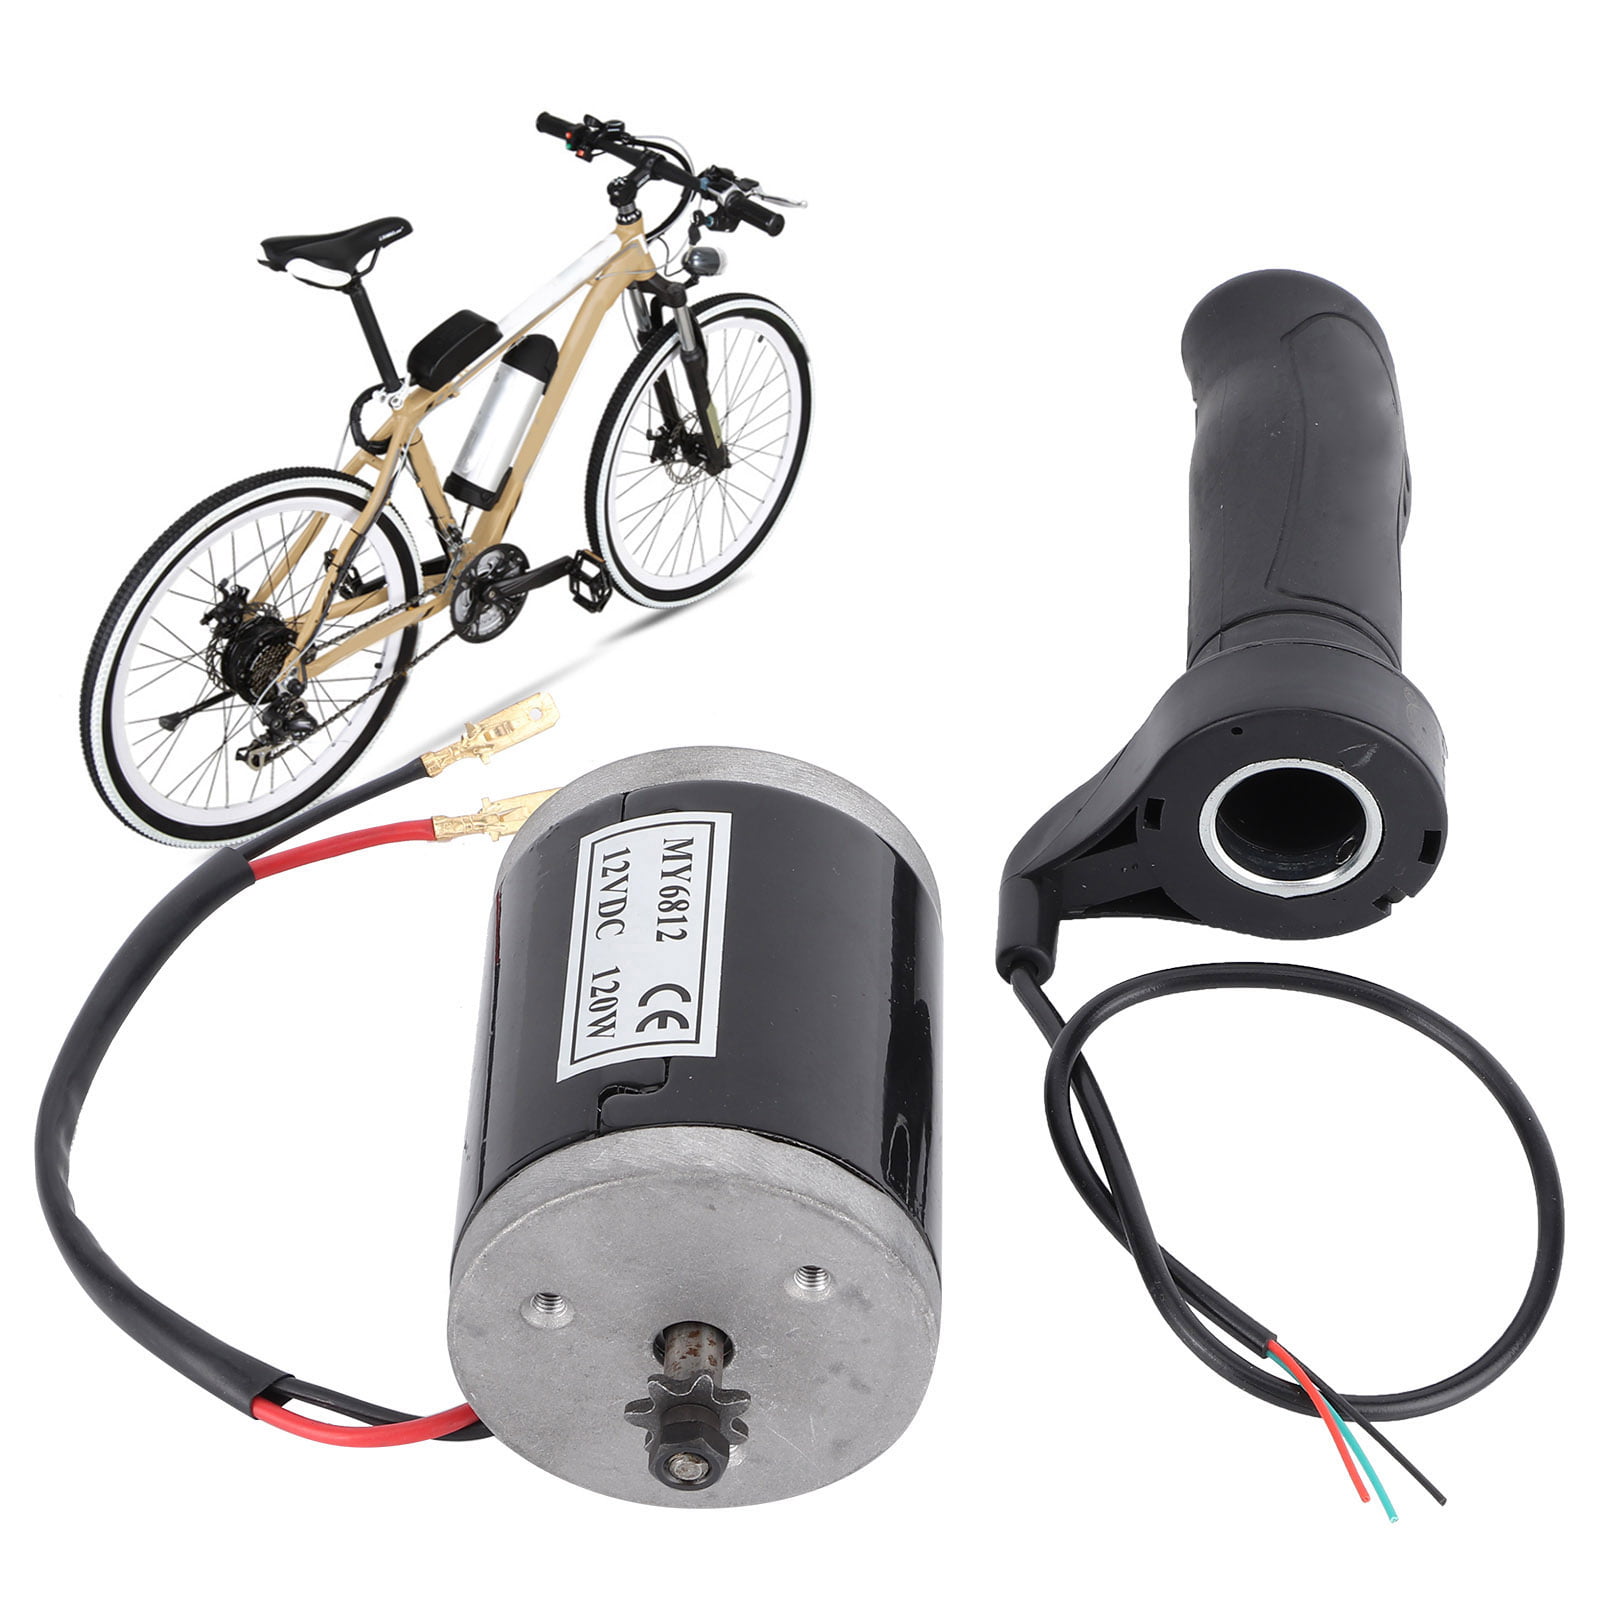 MY6812 12V 120W High Speed Brush Motor w/Belt Pulley Electric Scooter Ebike Part 